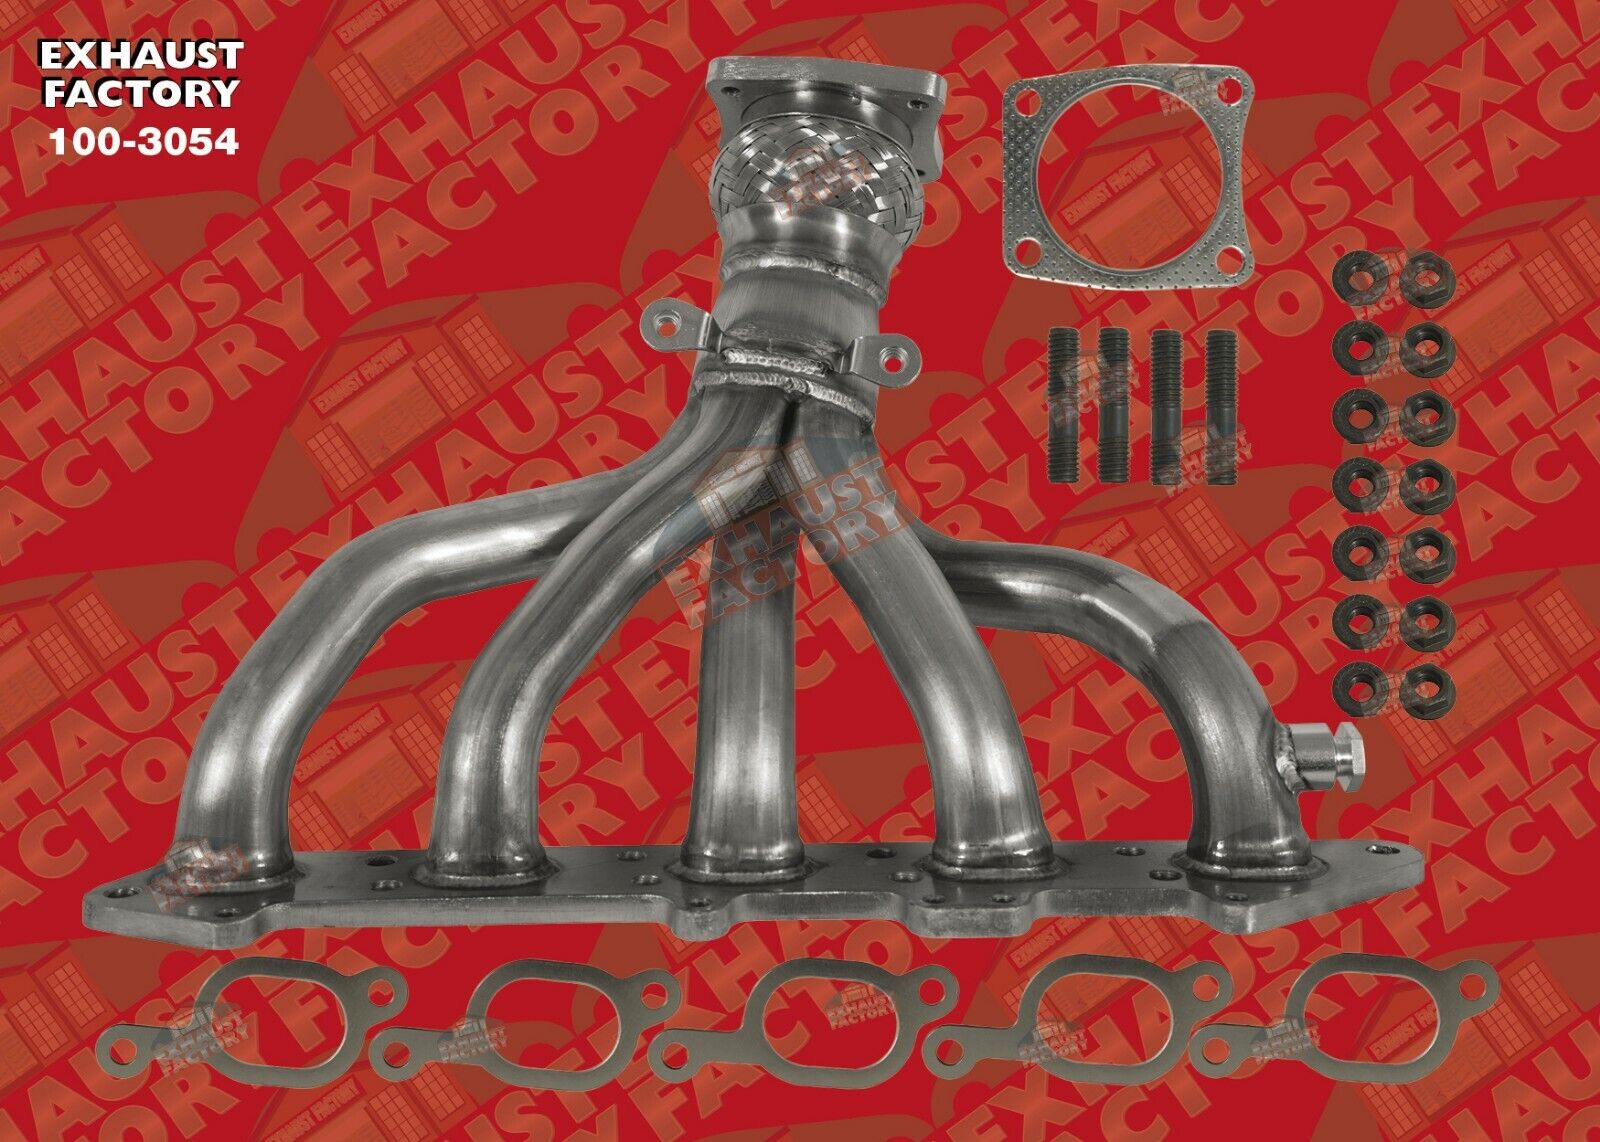 FRONT STAINLESS STEEL EXHAUST MANIFOLD FITS VOLVO V70, S70 AND 850 2.4L ENG